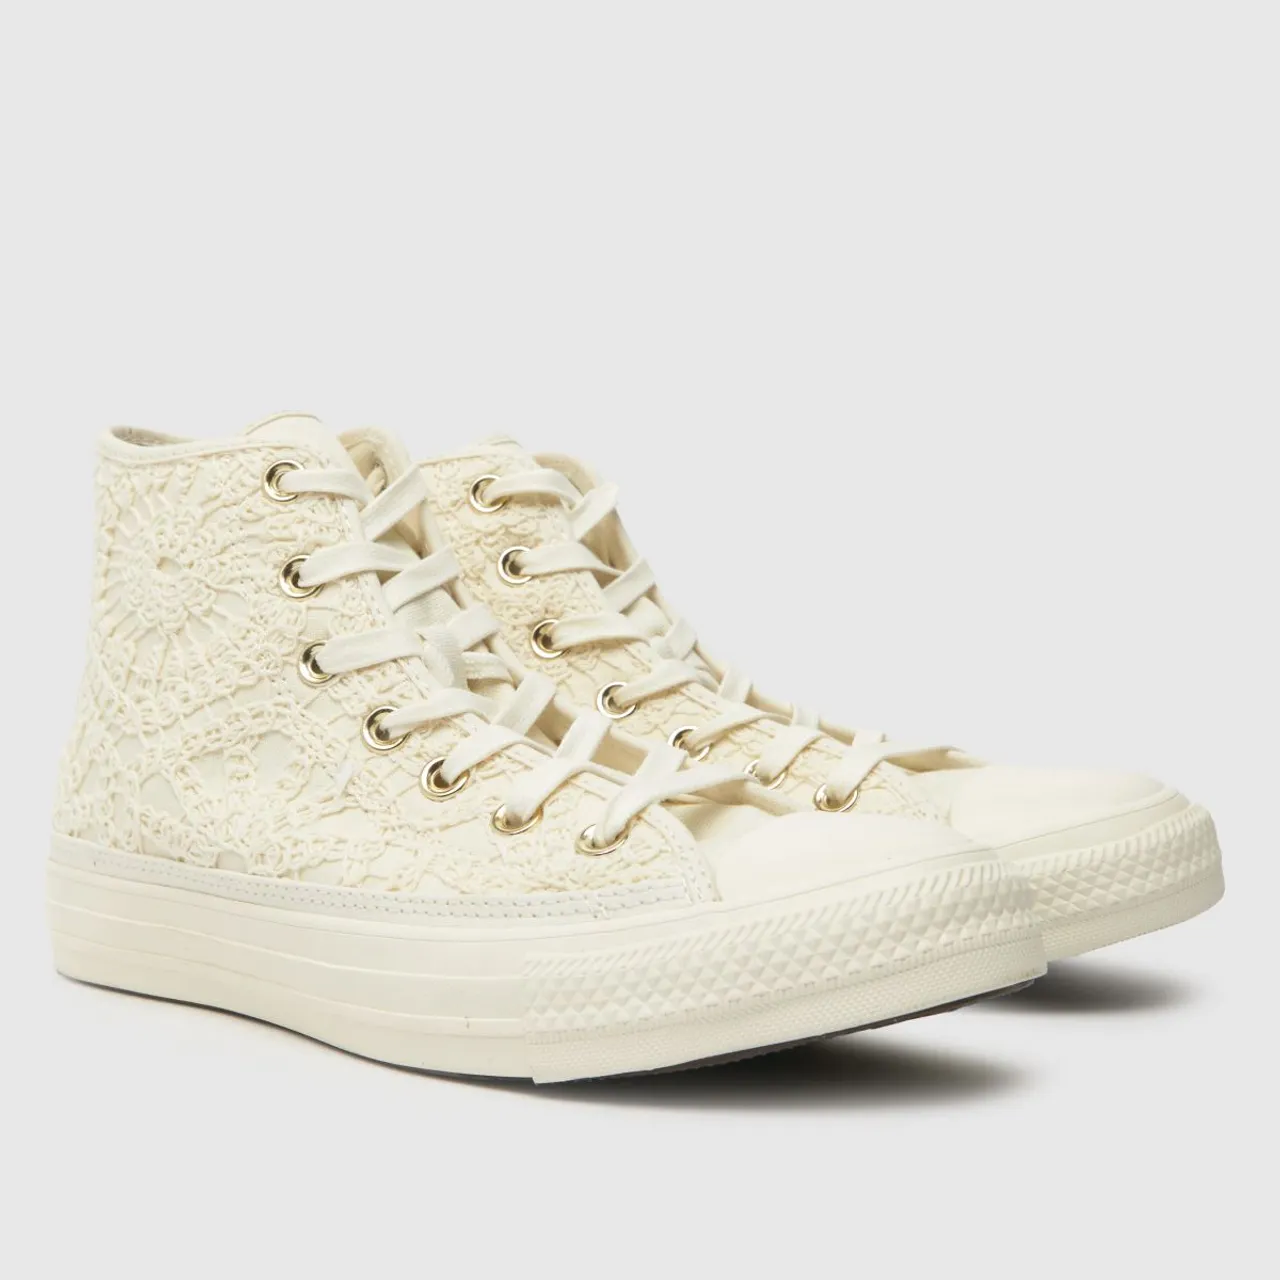 Converse All Star Hi Daisy Cord Trainers In White & Gold